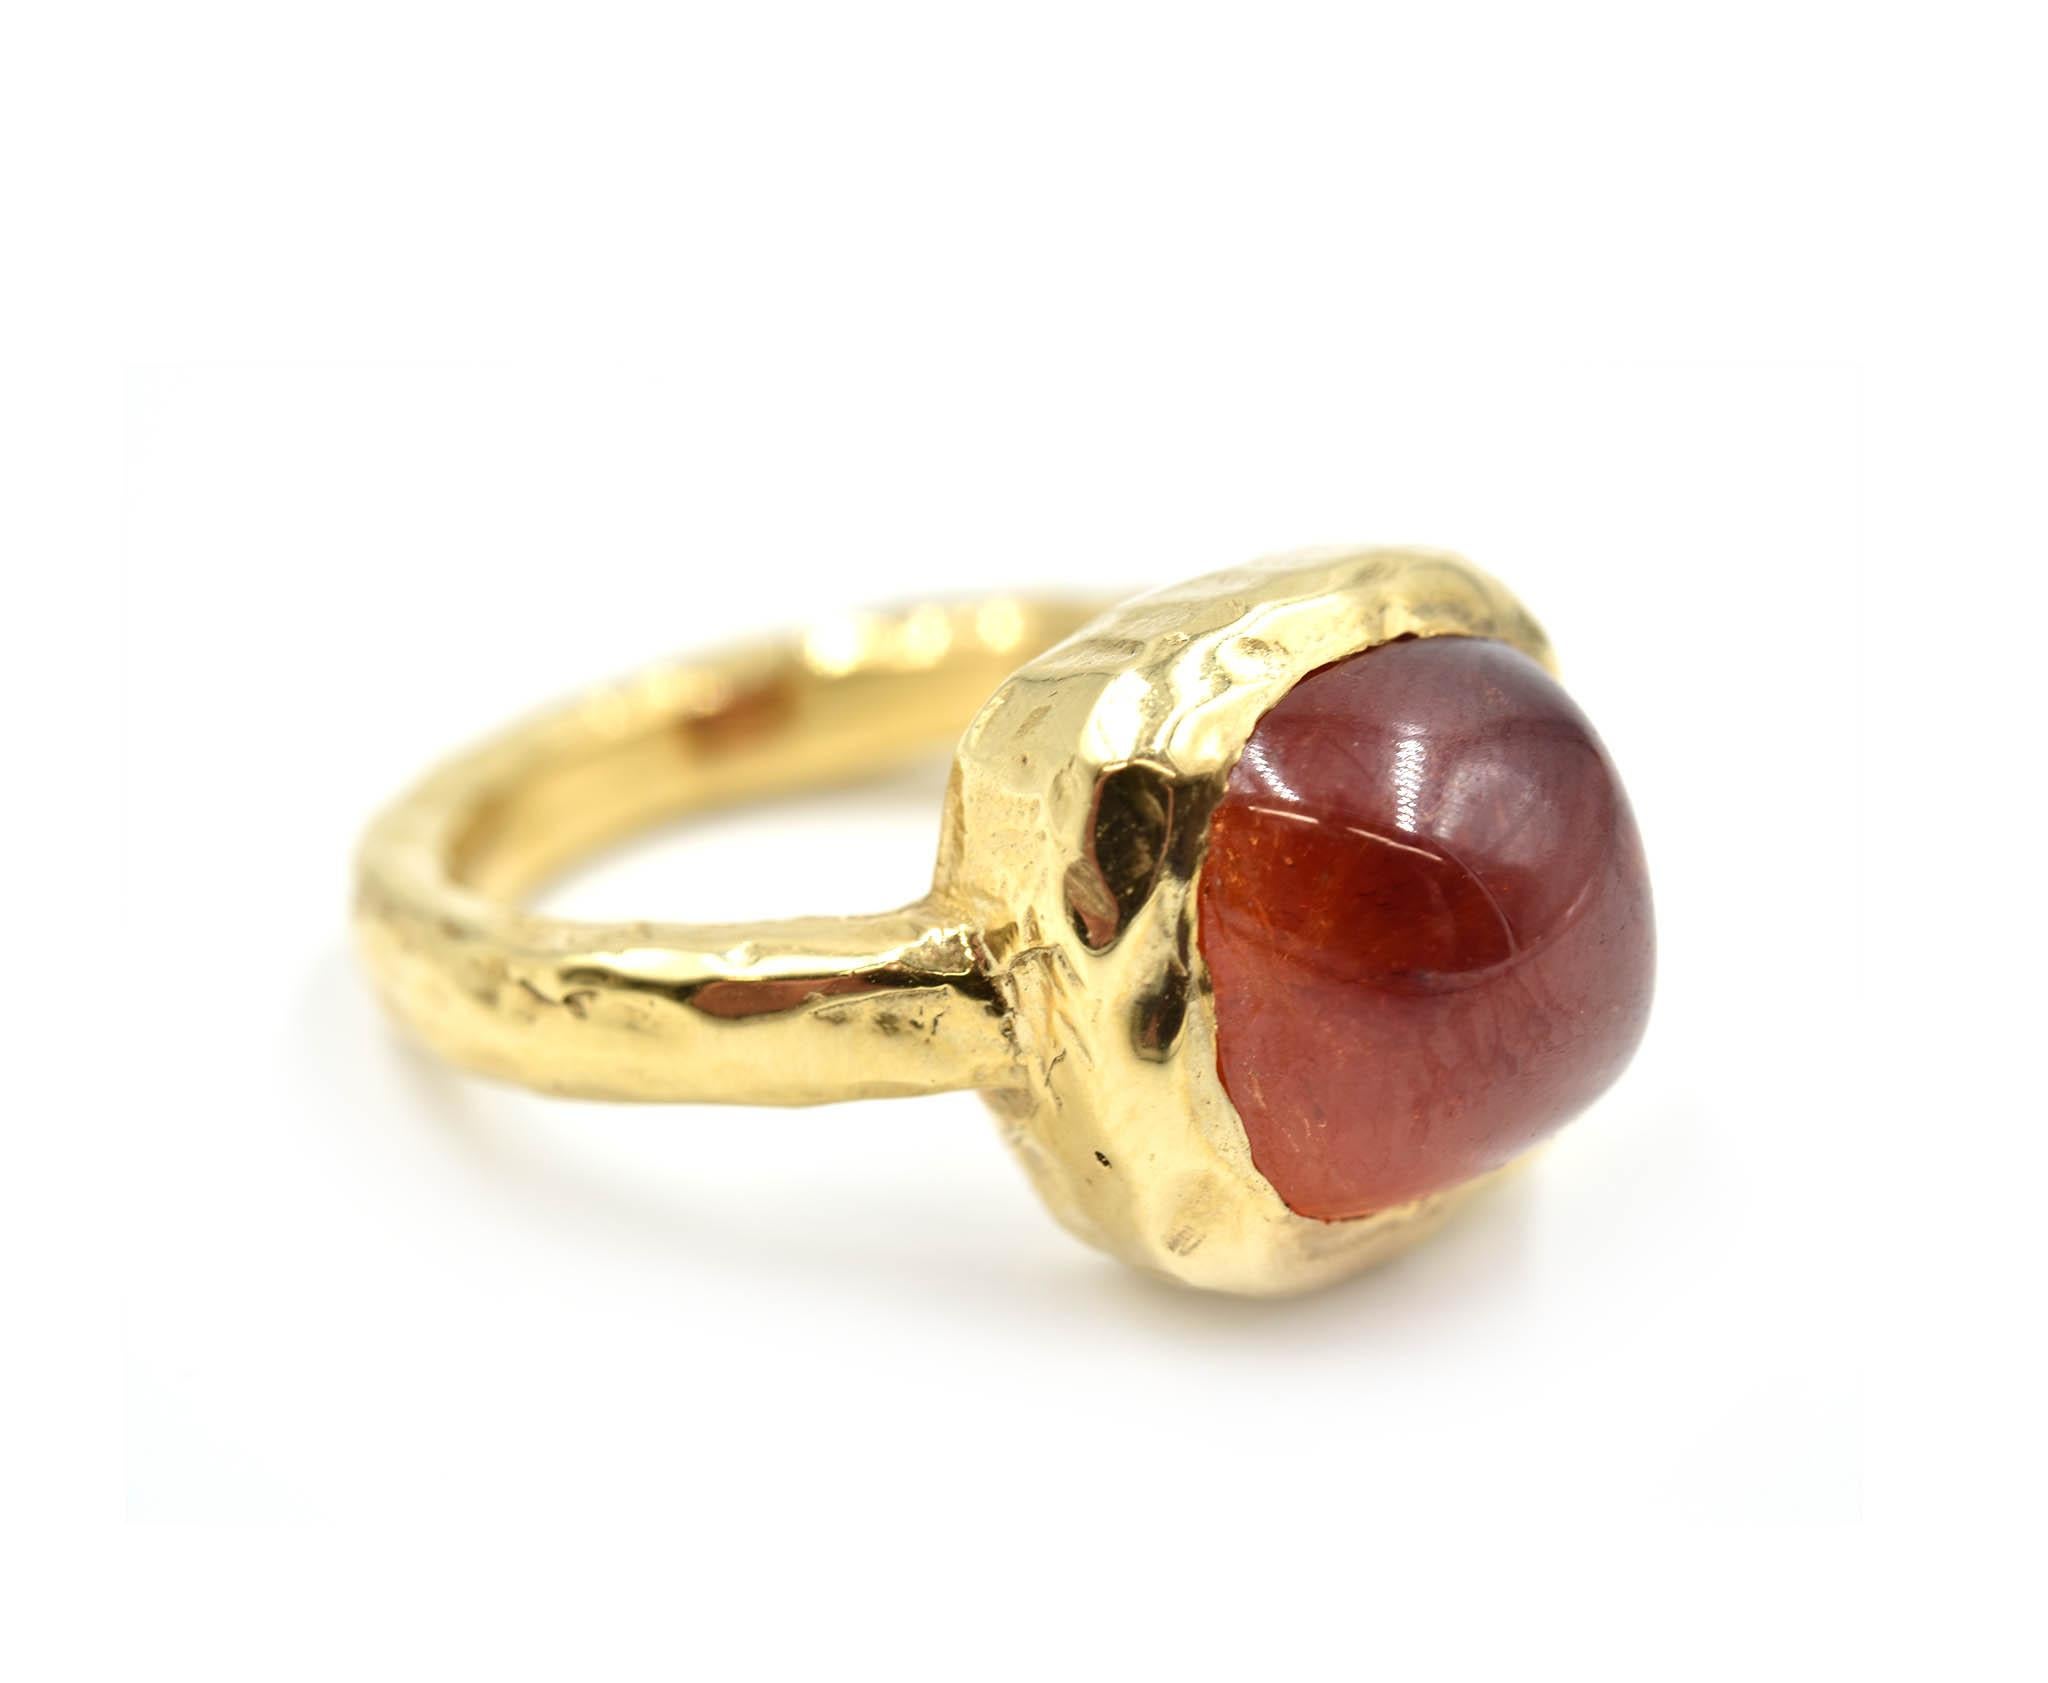 Designer: custom design
Material: 14k yellow gold
Red Tourmaline: cabochon cut red tourmaline 9.7x9.7mm
Ring Size: 5 1/4 (please allow two additional shipping days for sizing requests)
Weight: 9.00 grams
